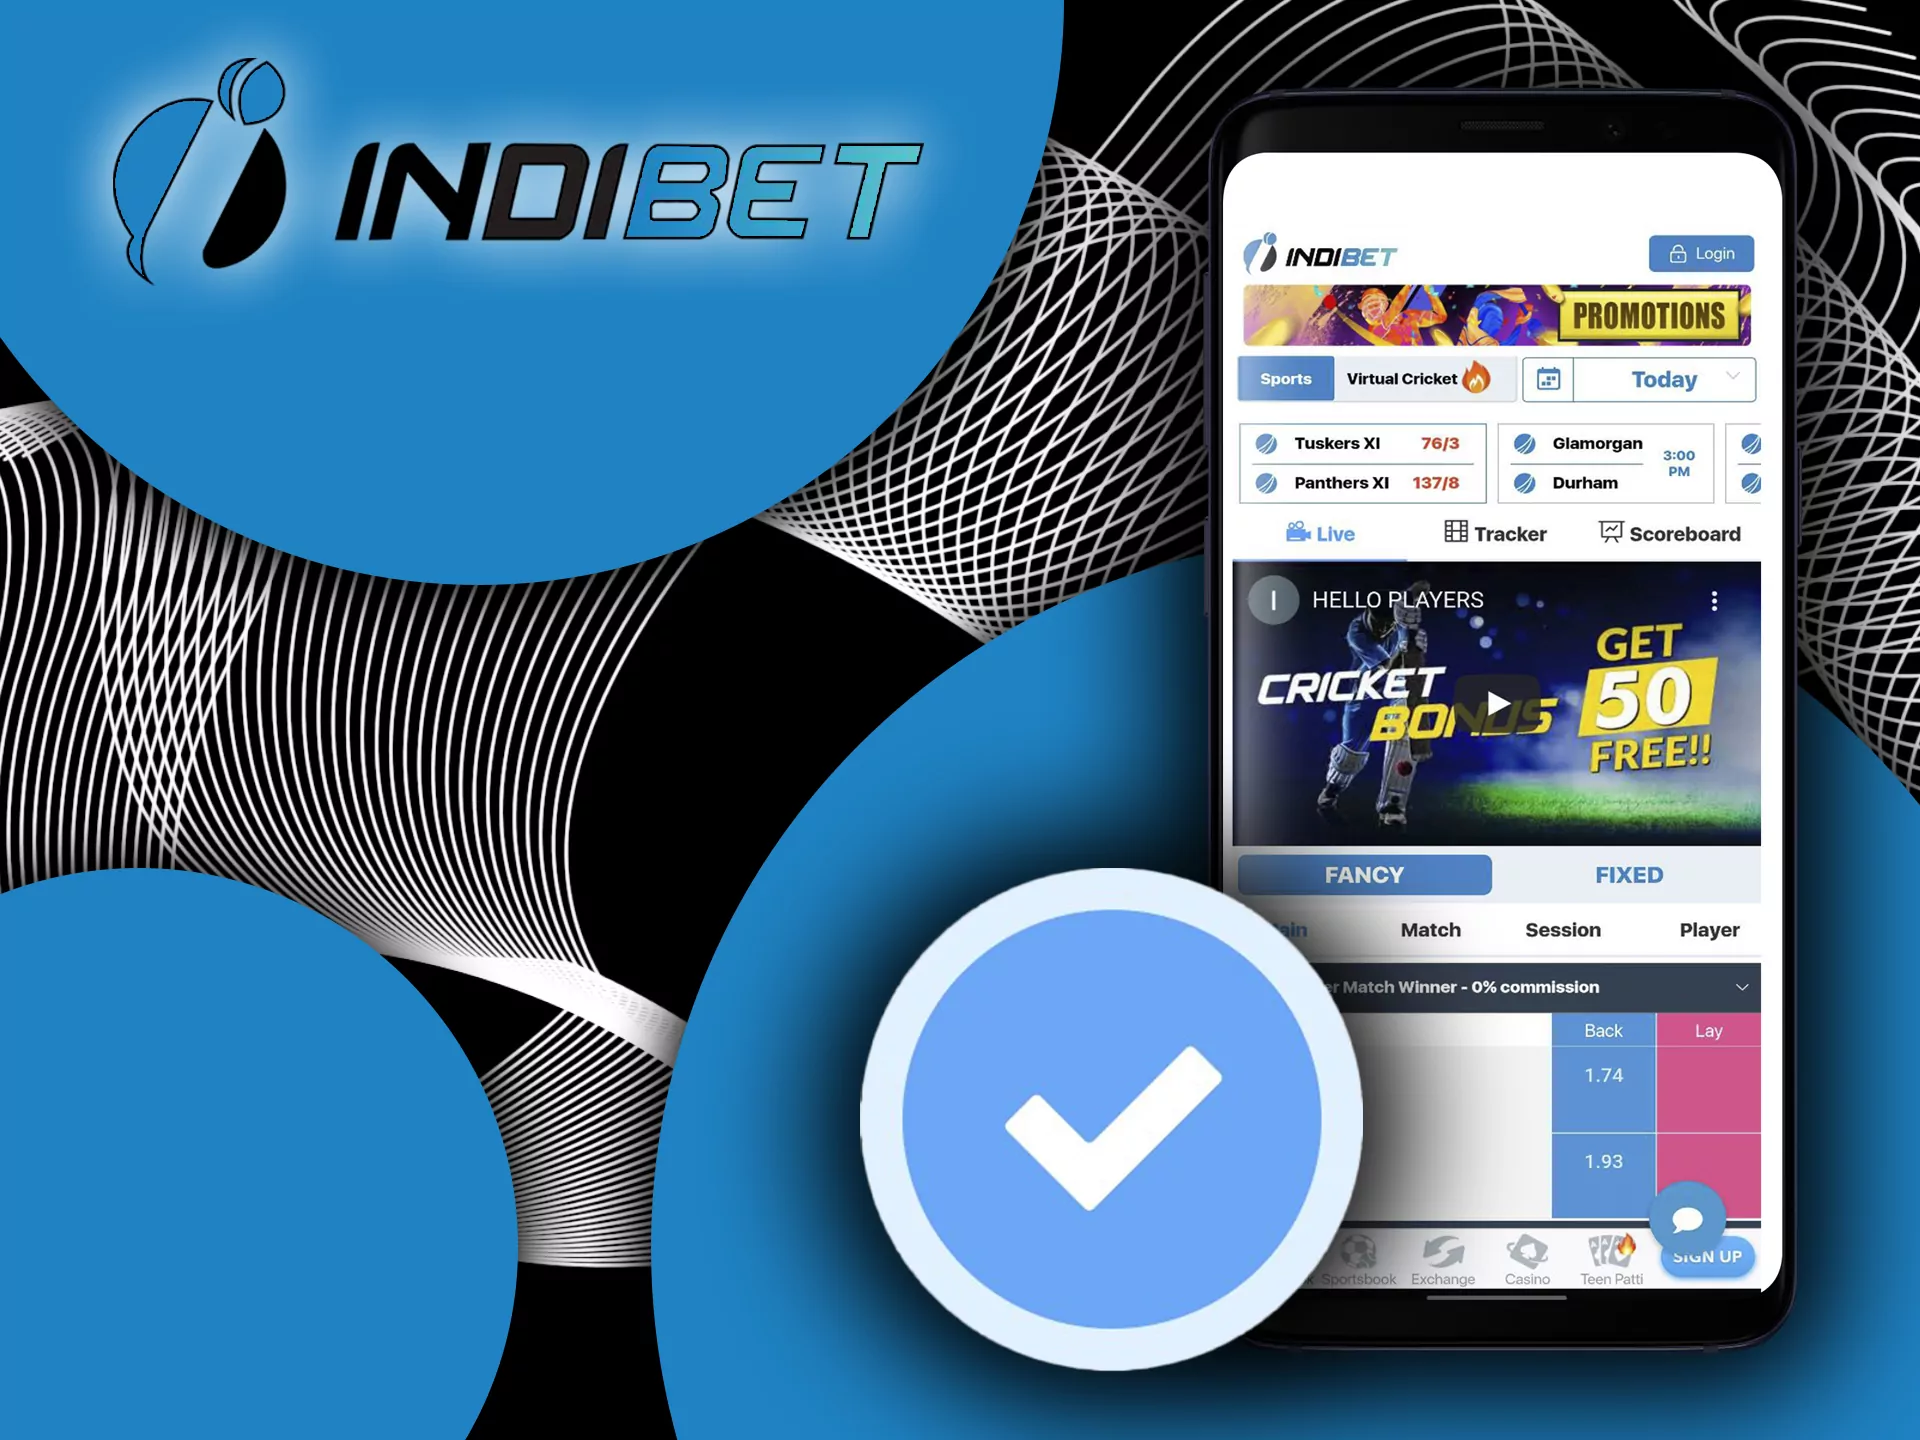 The Indibet app is much more comfort and fun to place bets in.